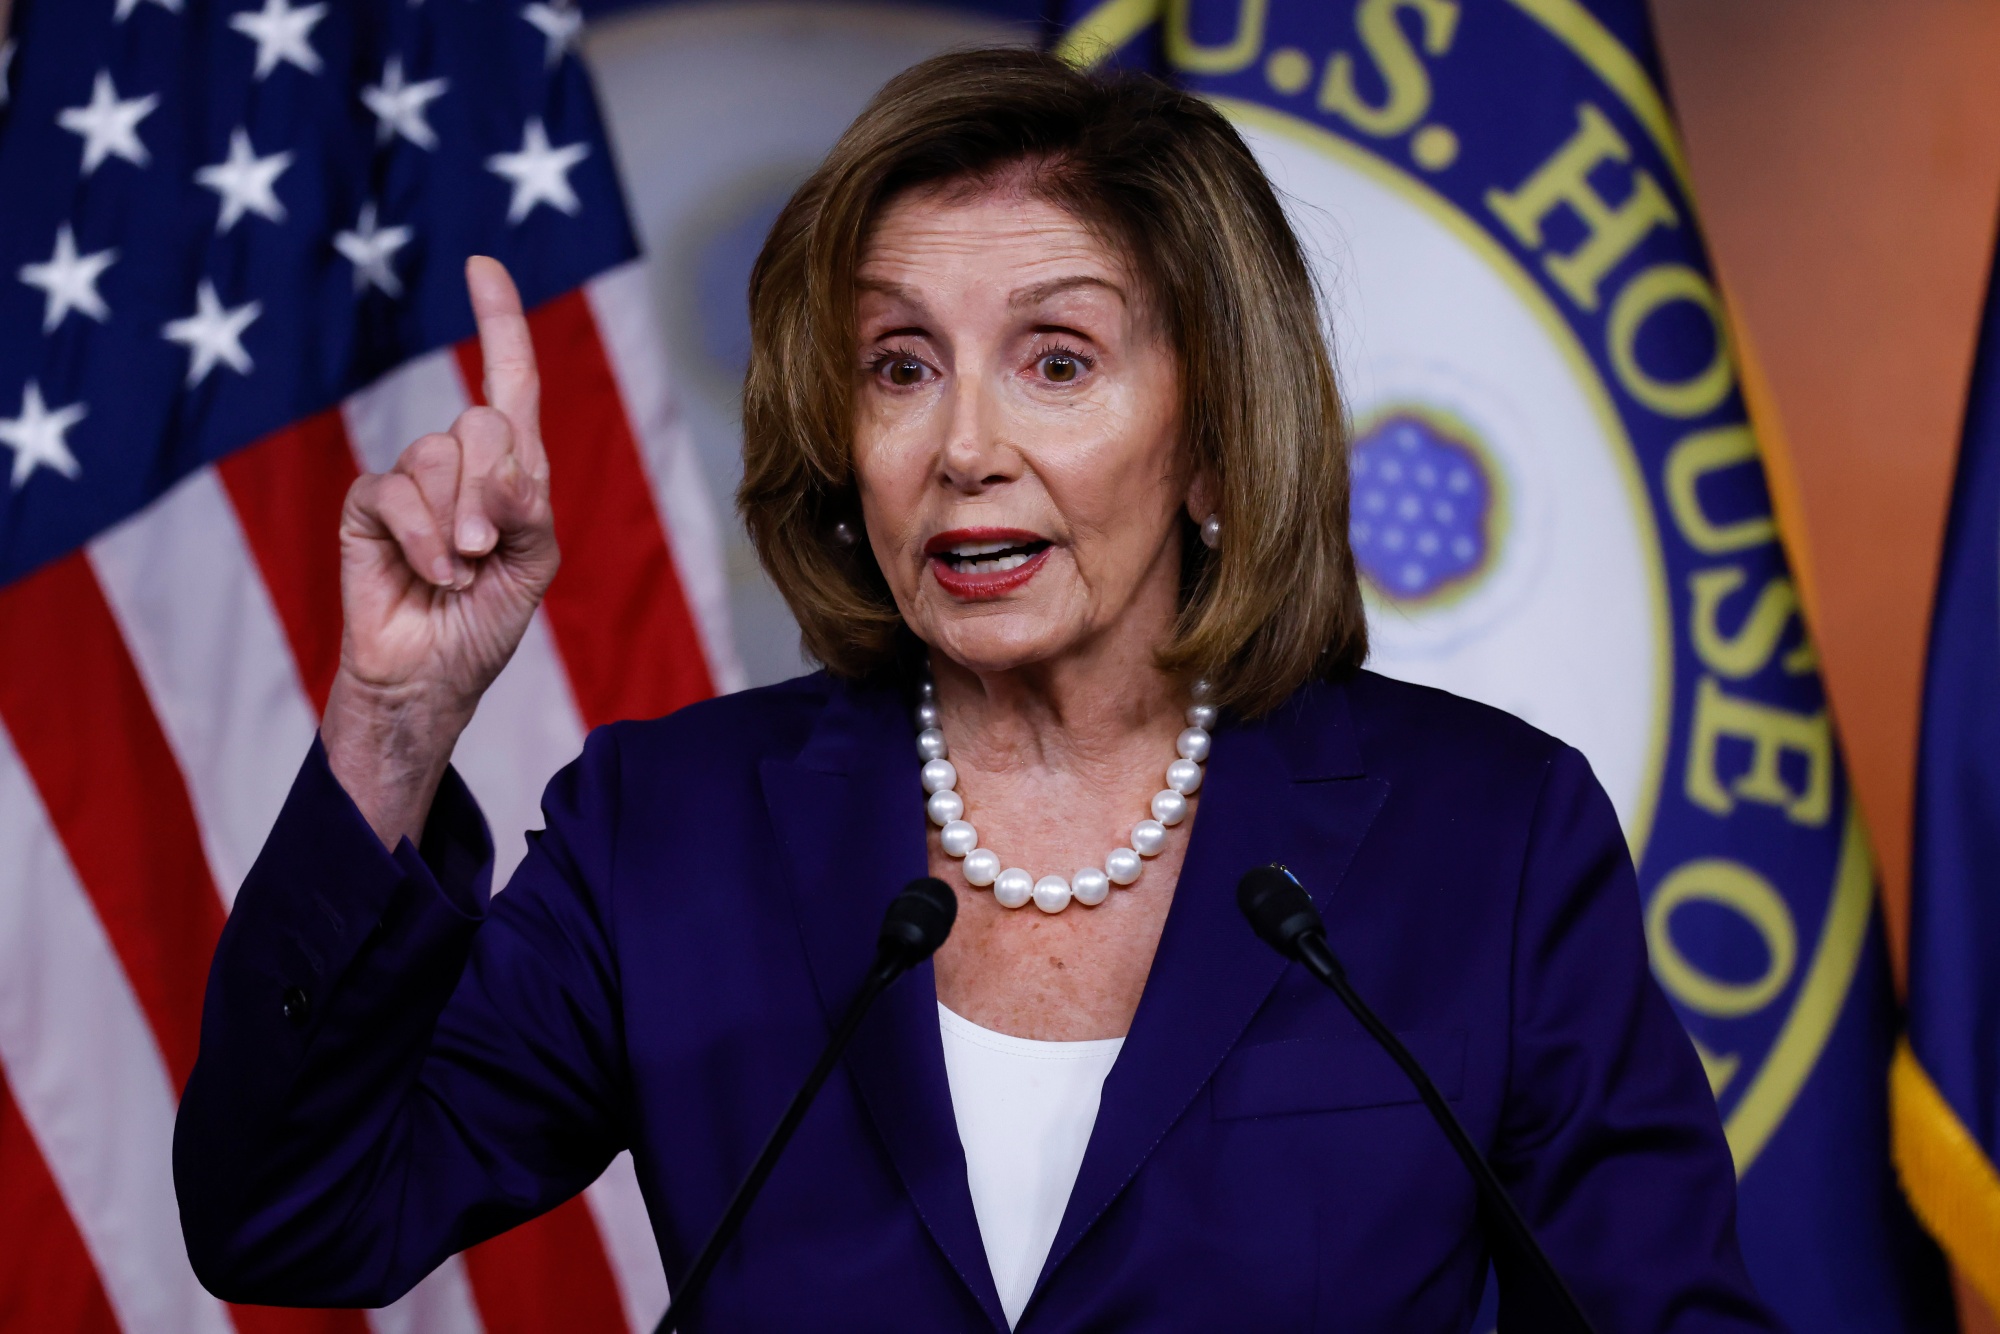 Pelosi's Taiwan Trip Would Anger China and May Trigger Trump Prophecy - Bloomberg